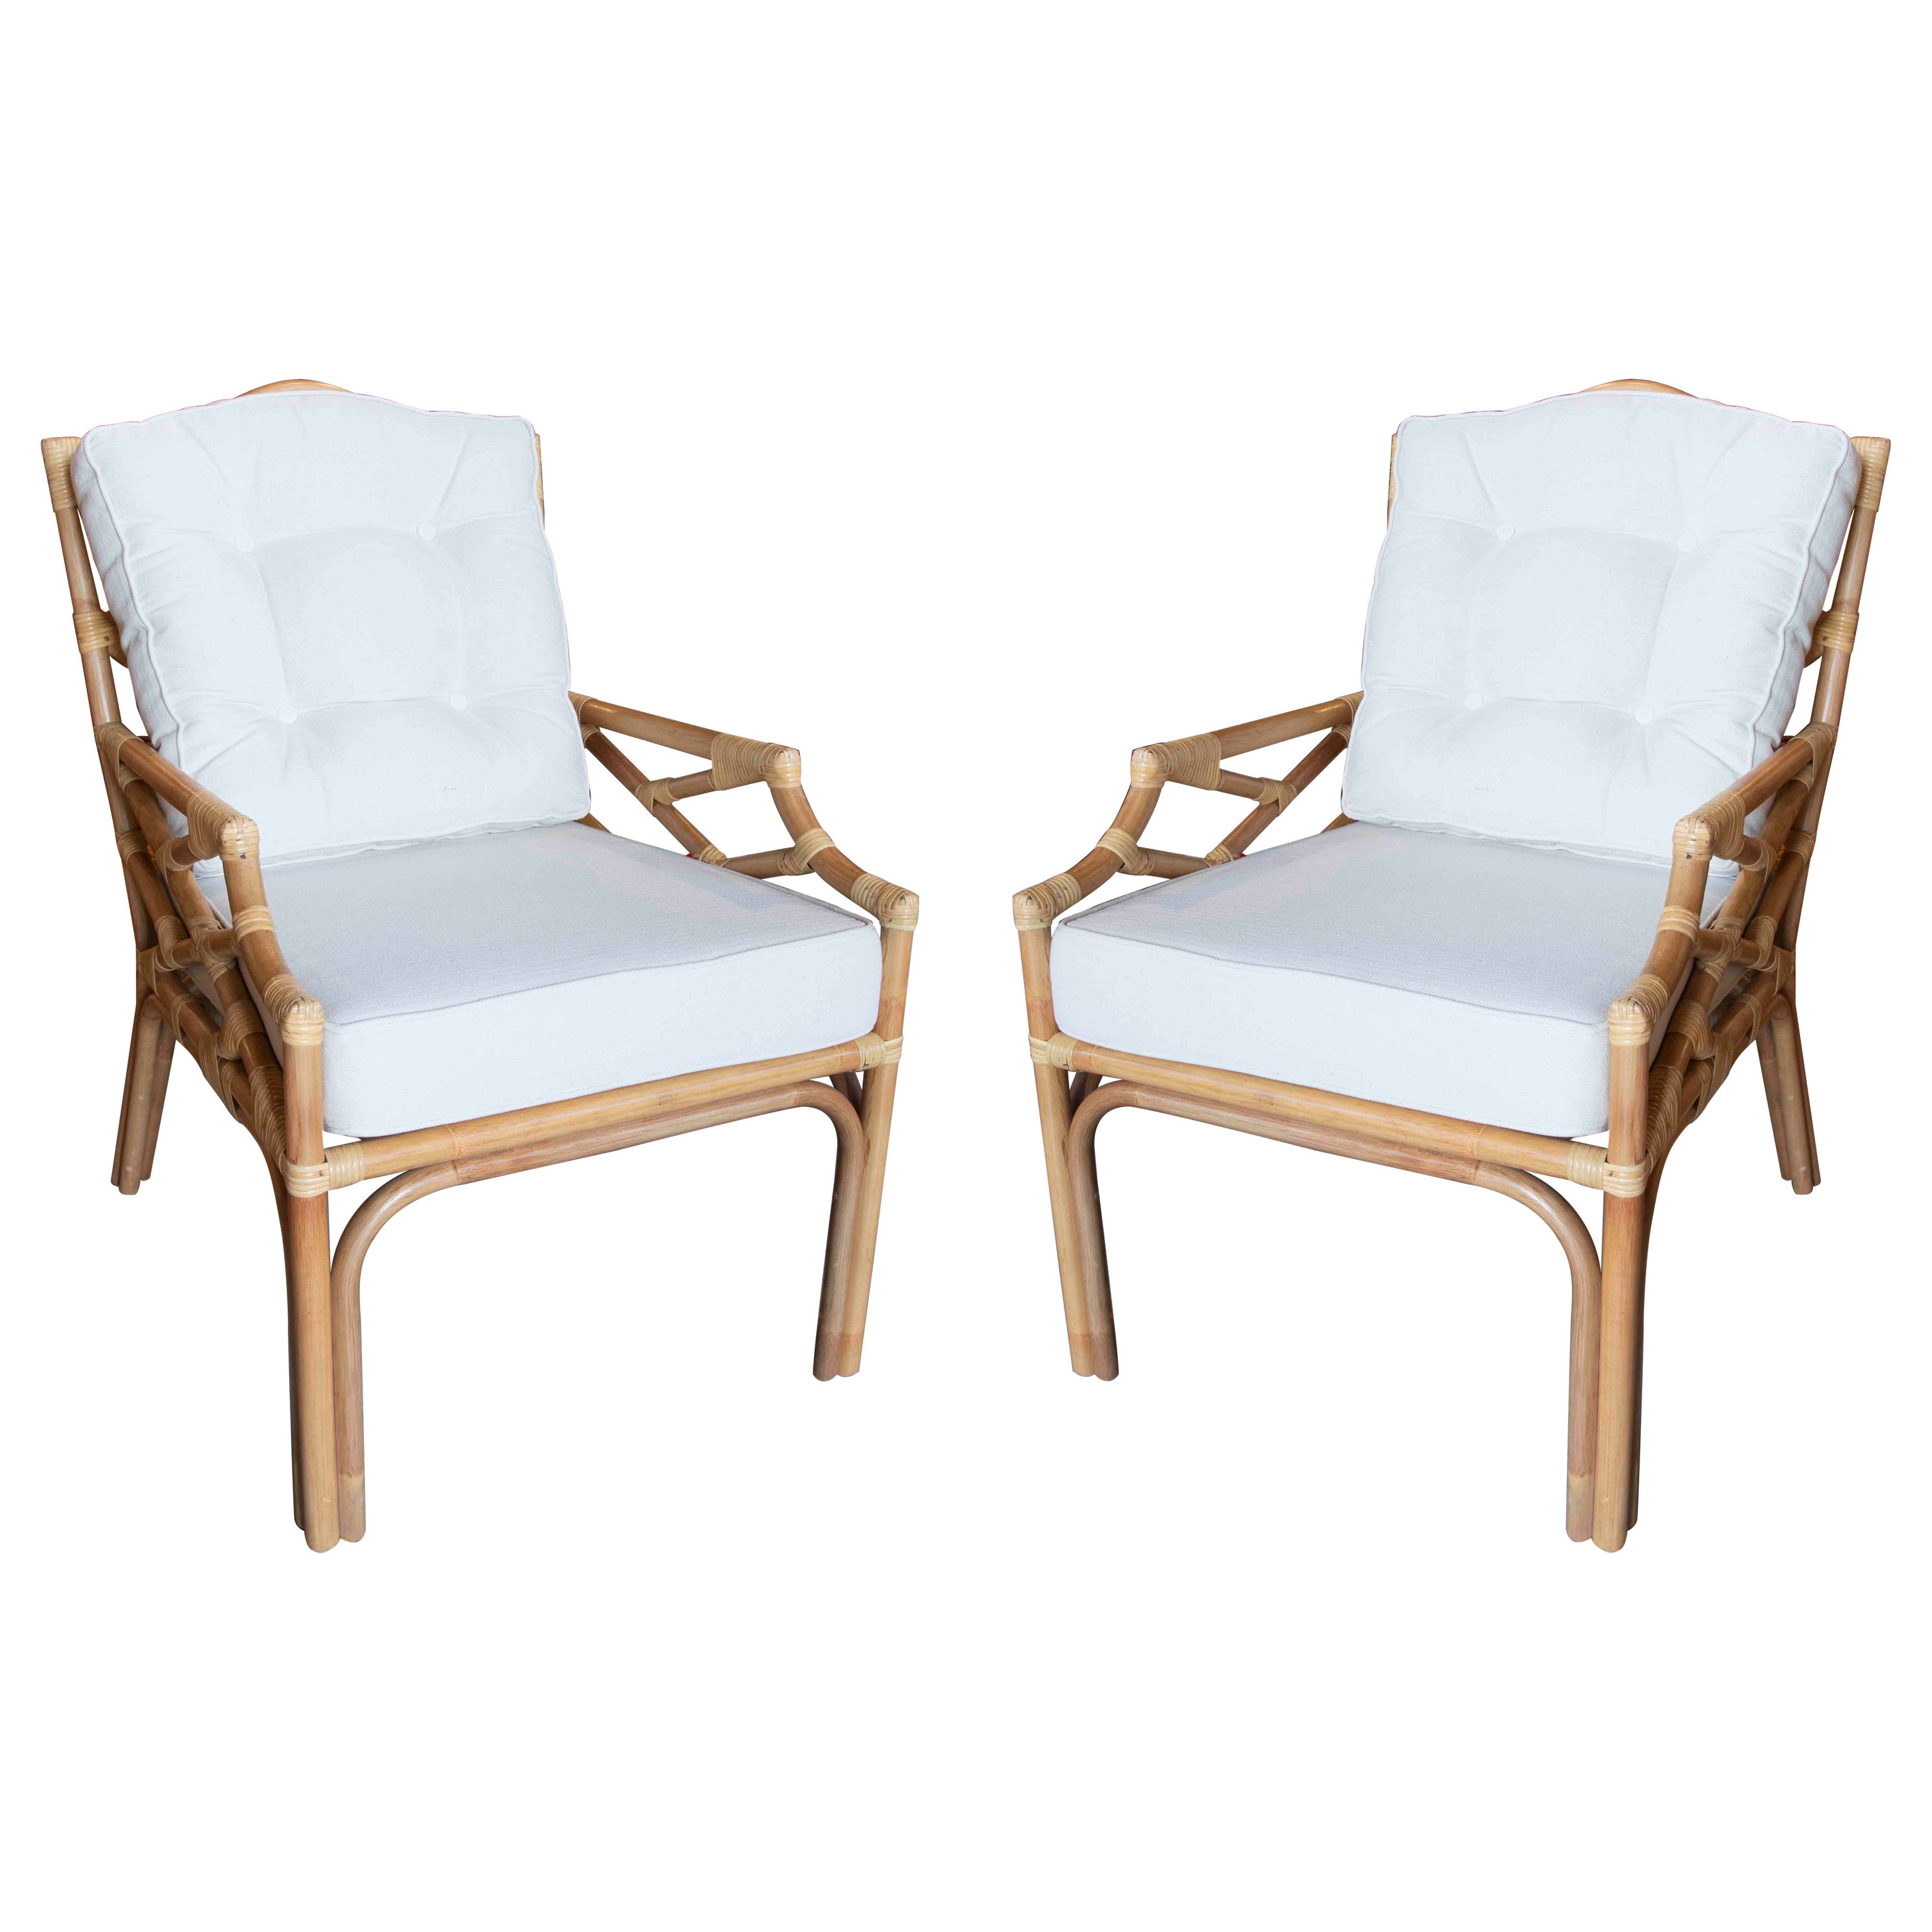 Pair of Handmade Bamboo Armchairs with Beige Cushions